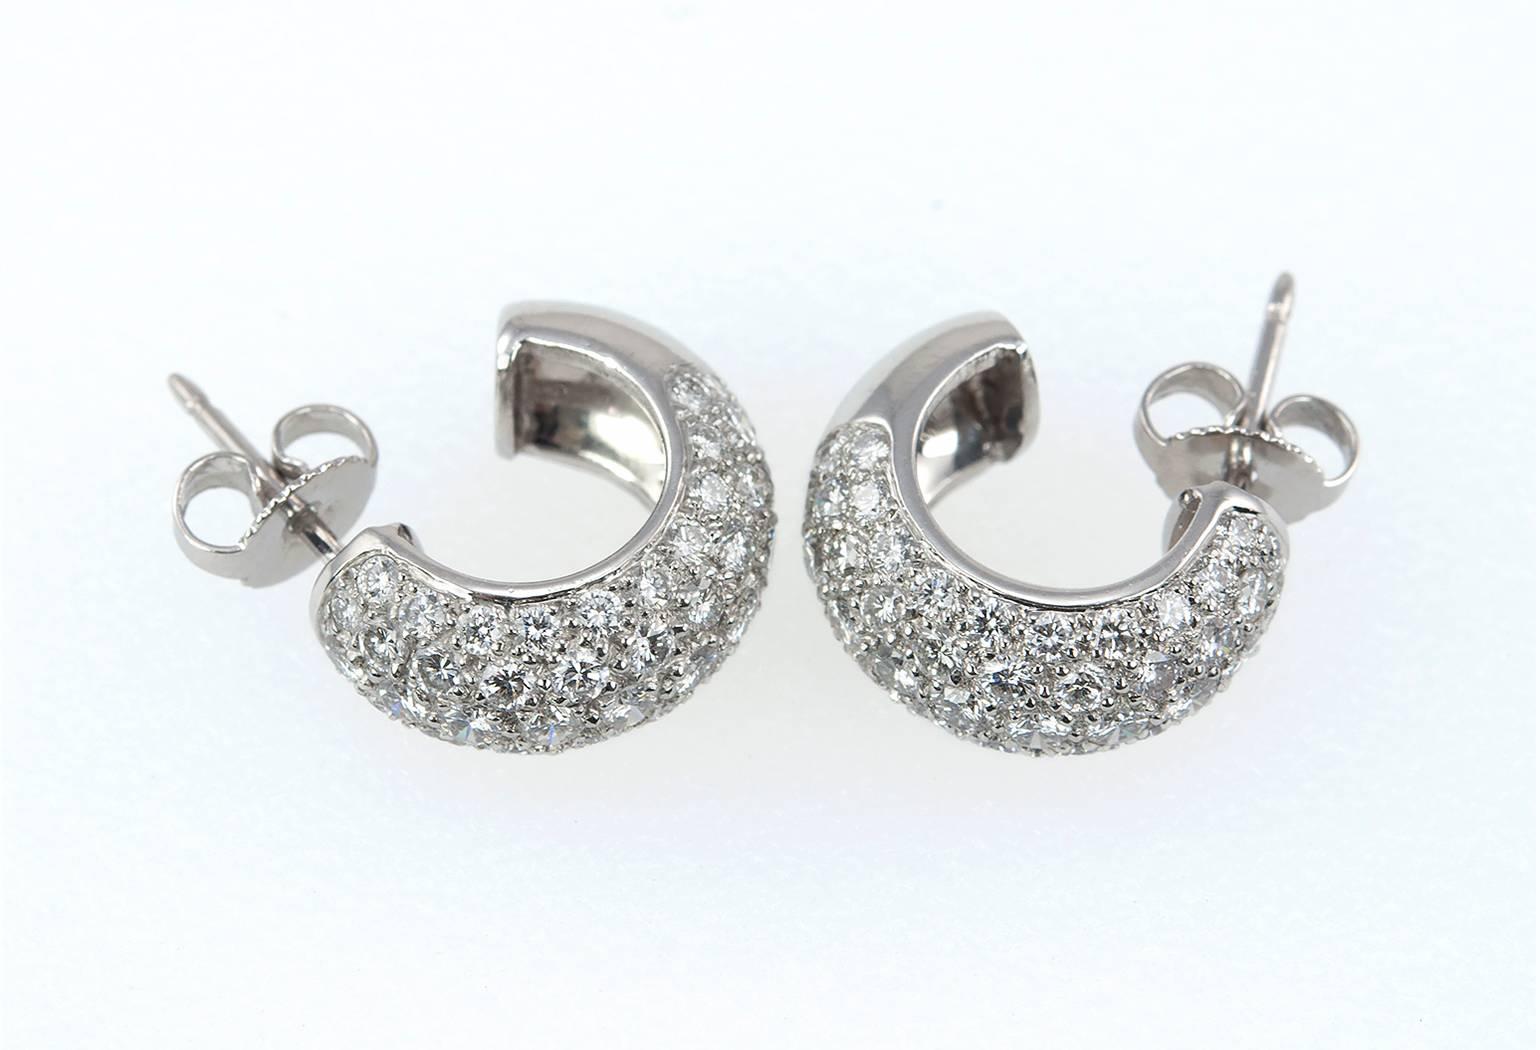 Super sparkly Tiffany & Co. diamond and platinum hoop earrings.  These earrings have 104 round brilliant diamonds bead set in platinum for a total diamond weight of approximately 2.50 carats.  Signed Tiffany & Co, France from circa 2000s.

The